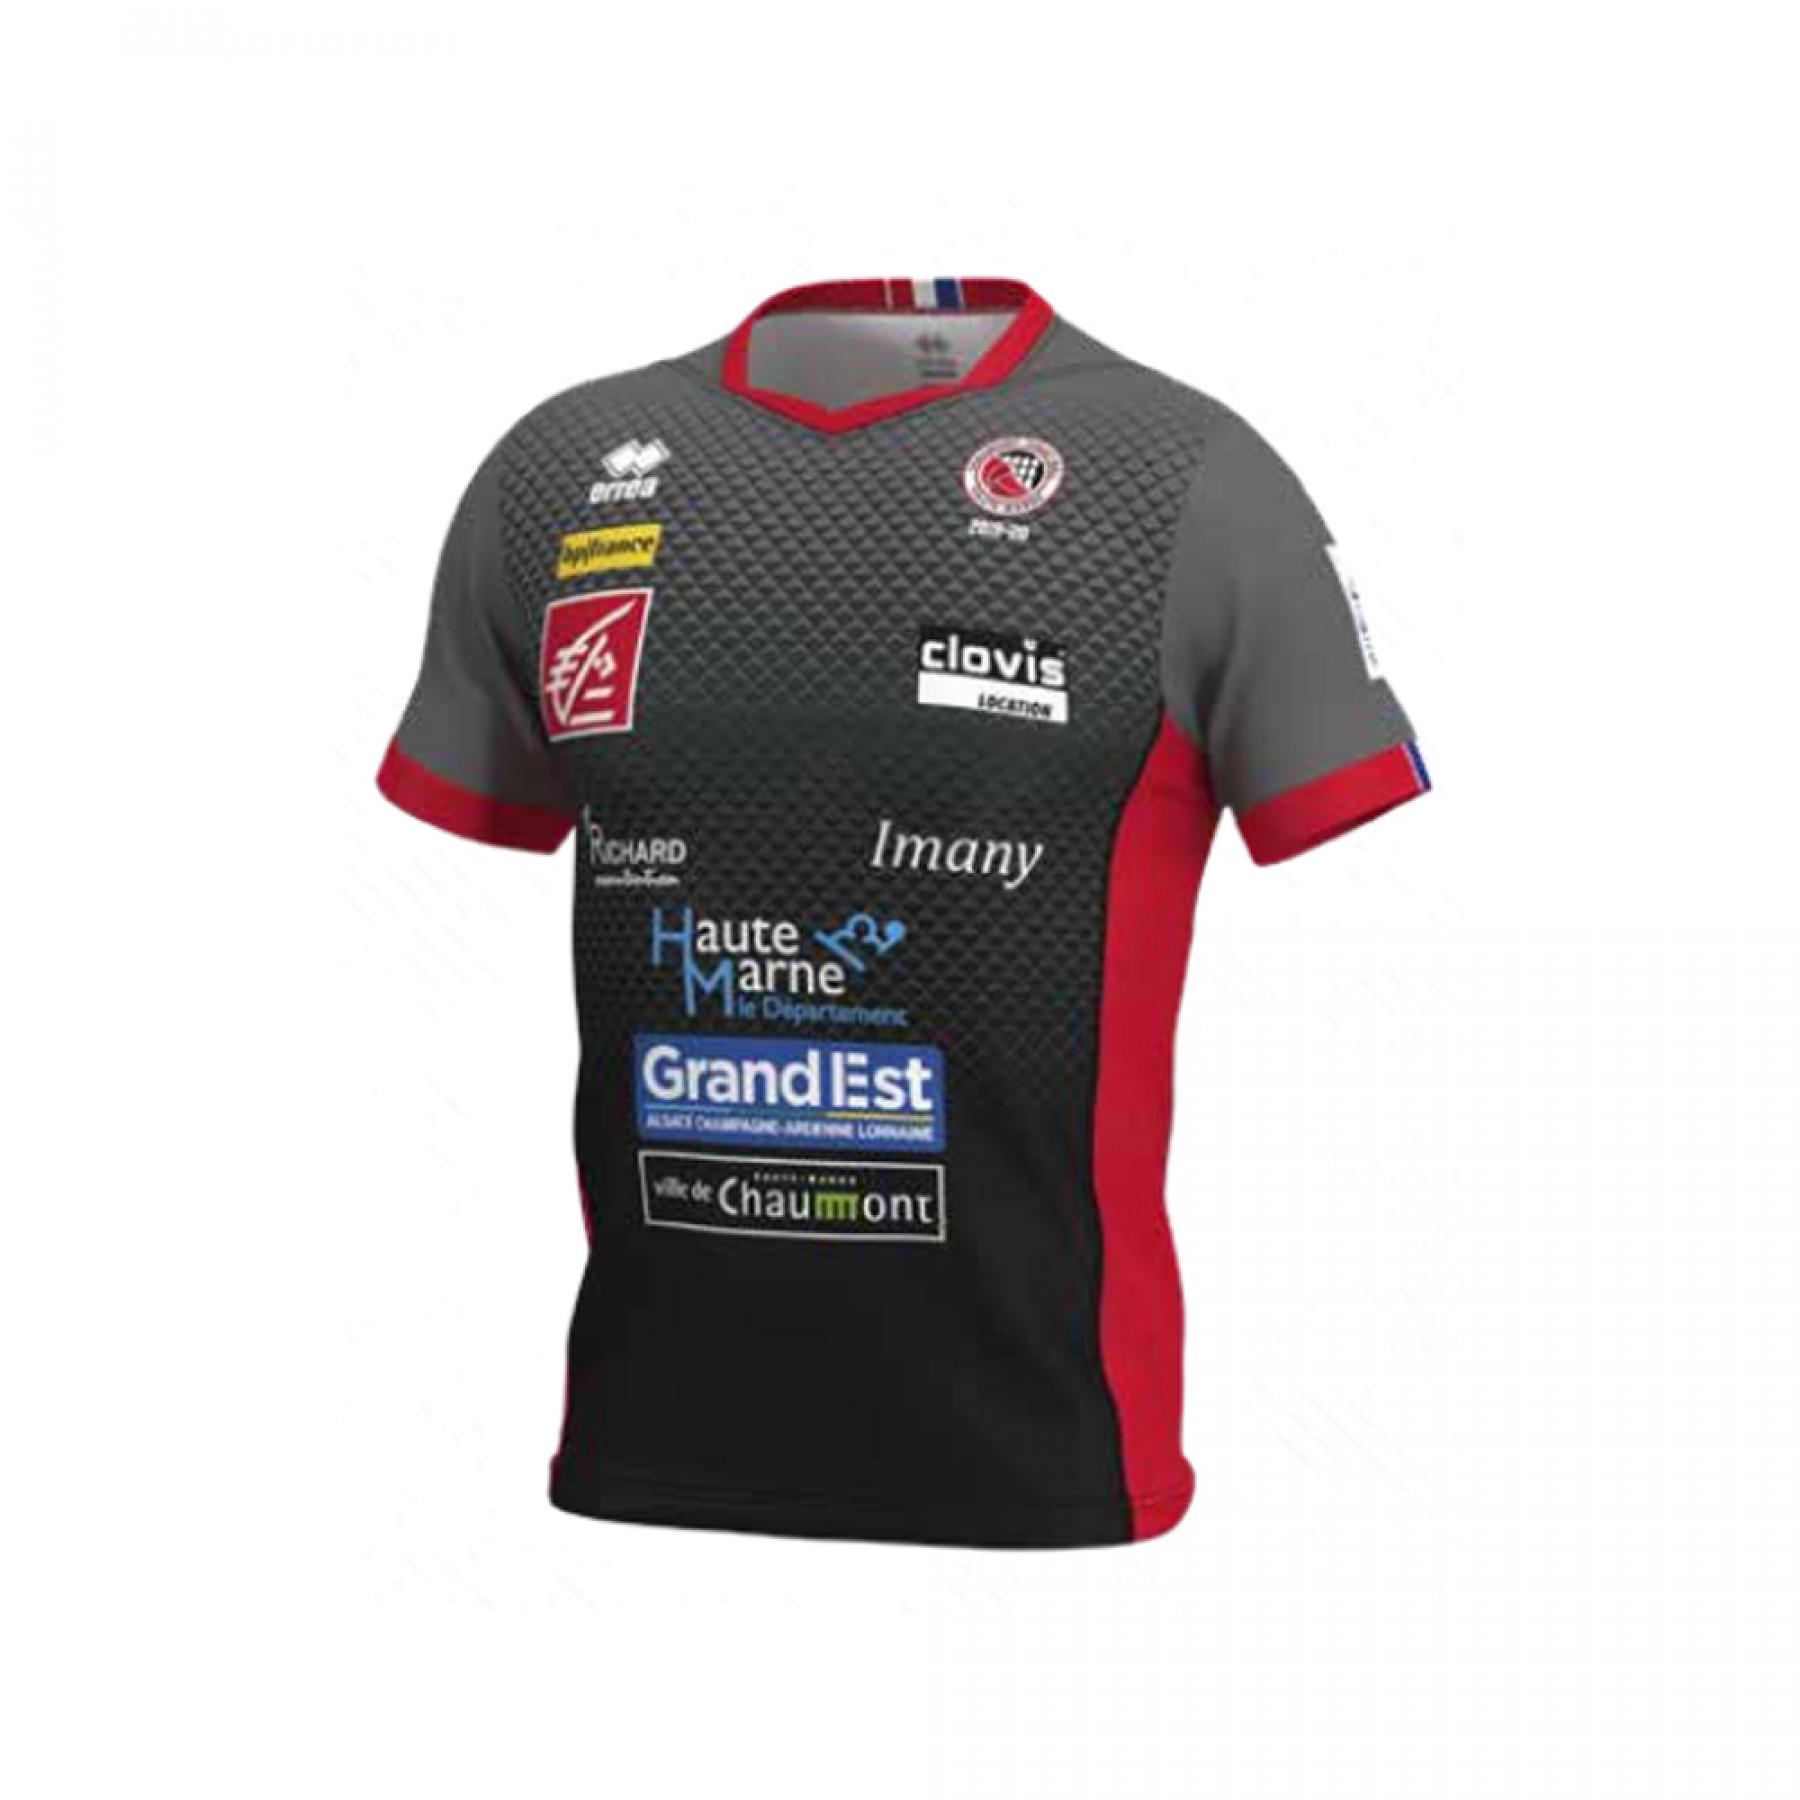 Outdoor jersey Chaumont Volley 2019/20